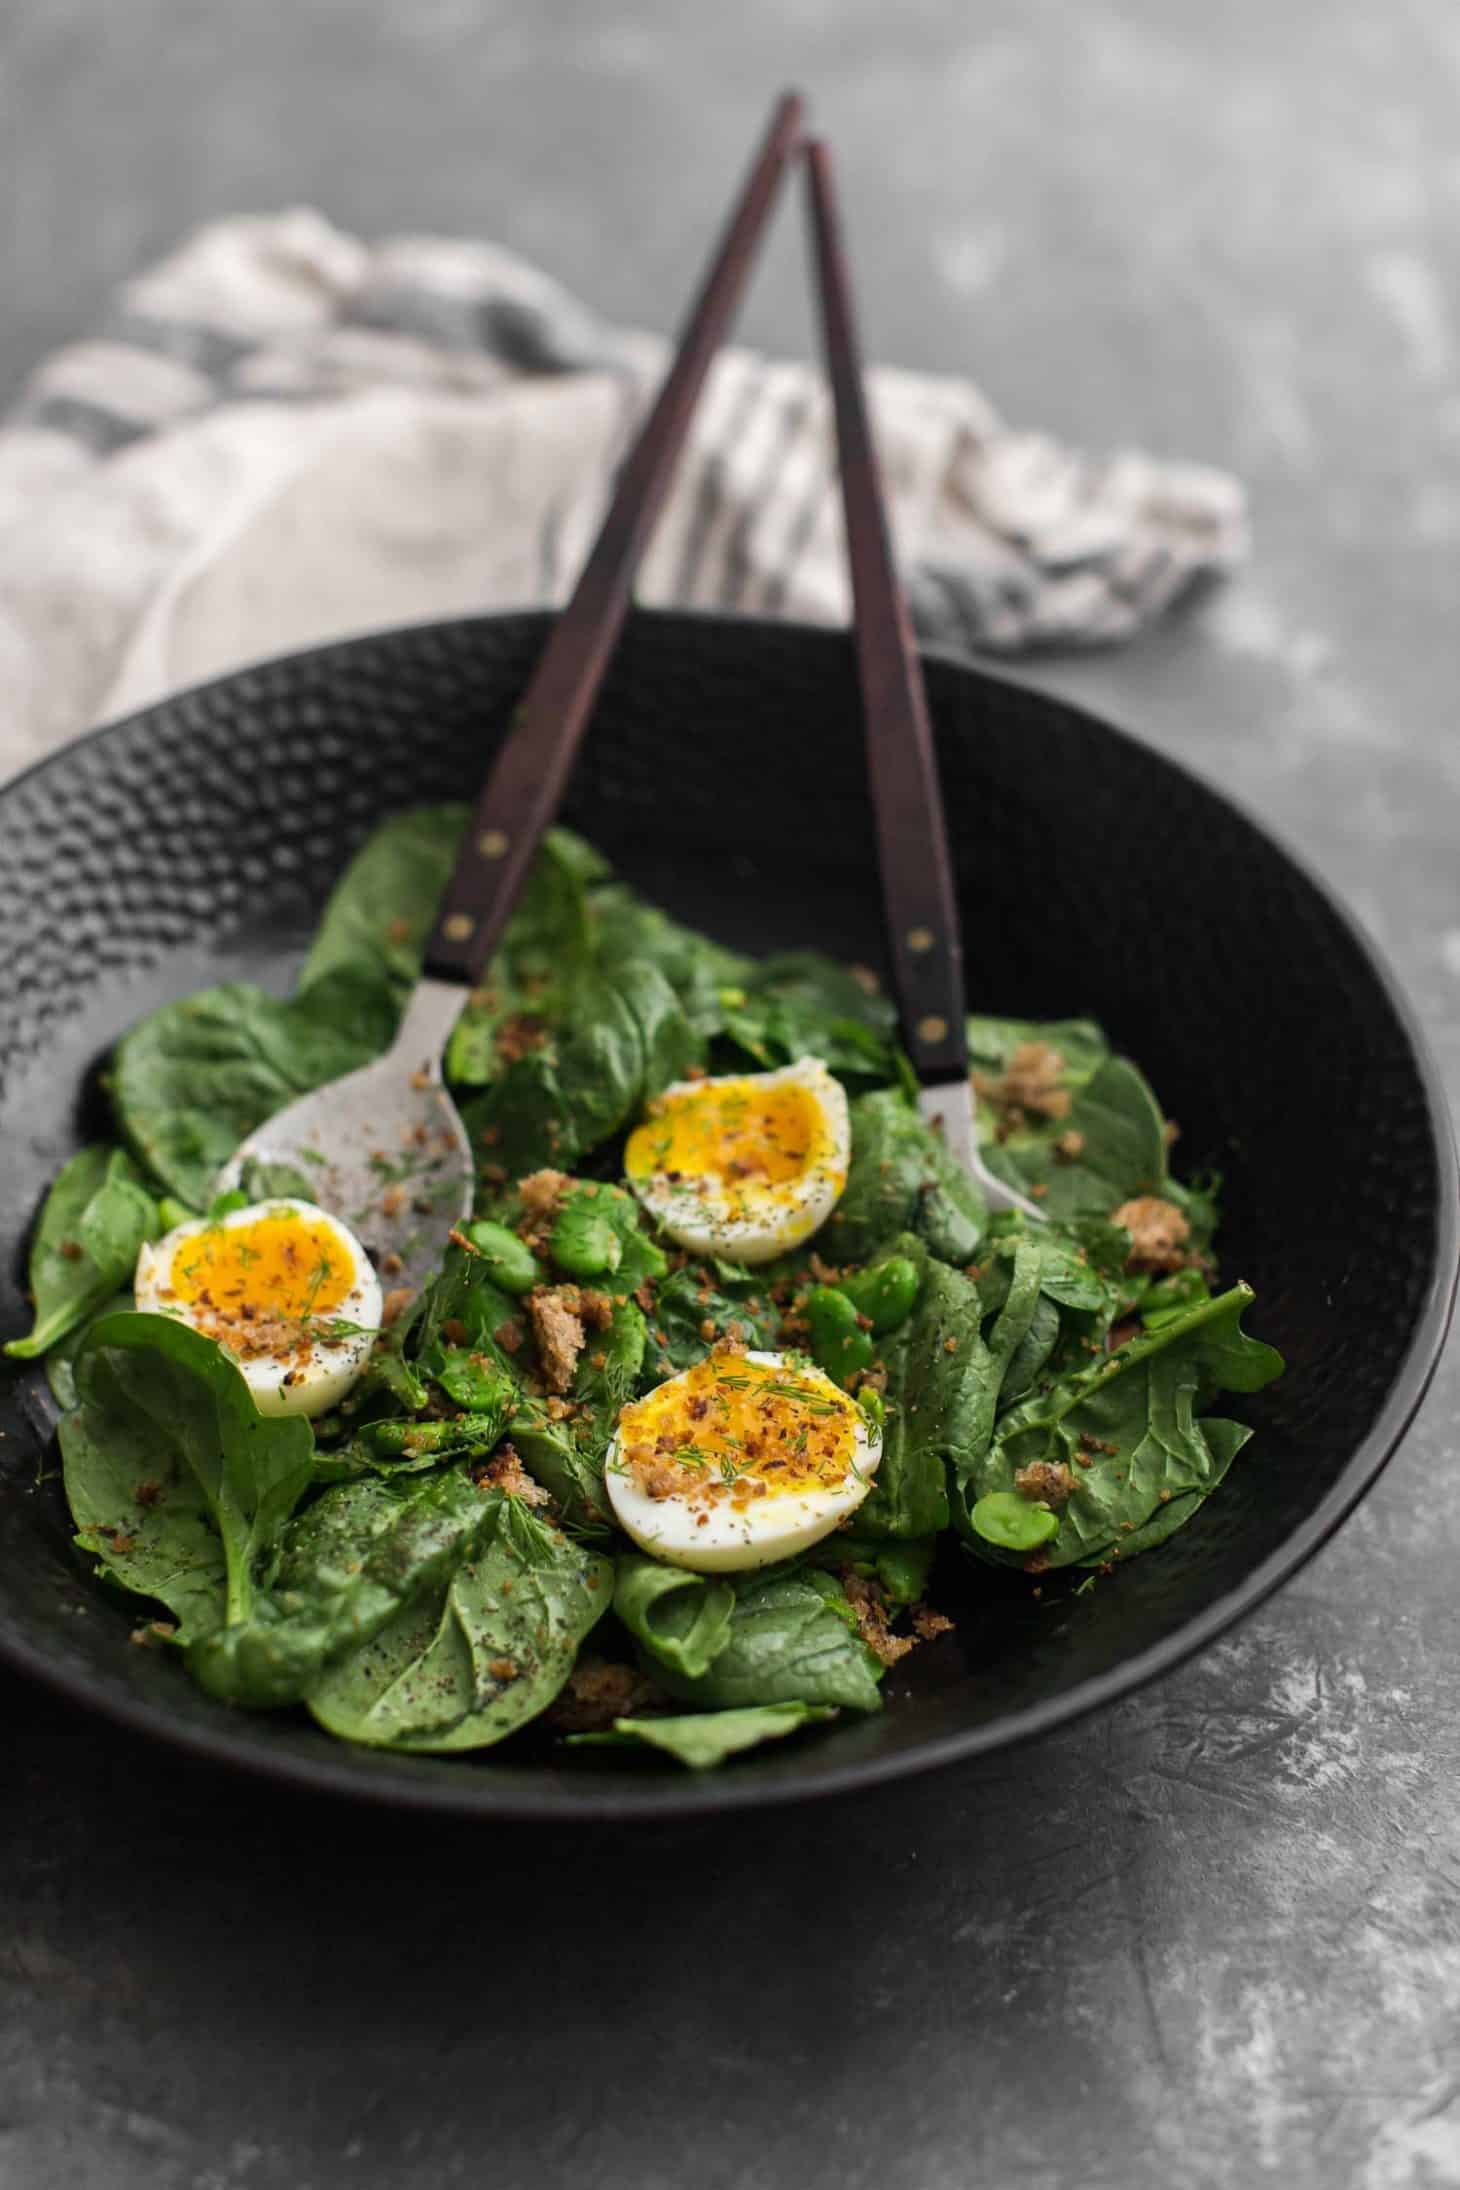 Buttered Fava Bean Salad with Soft-Boiled Eggs and Rye Breadcrumbs | Naturally Ella